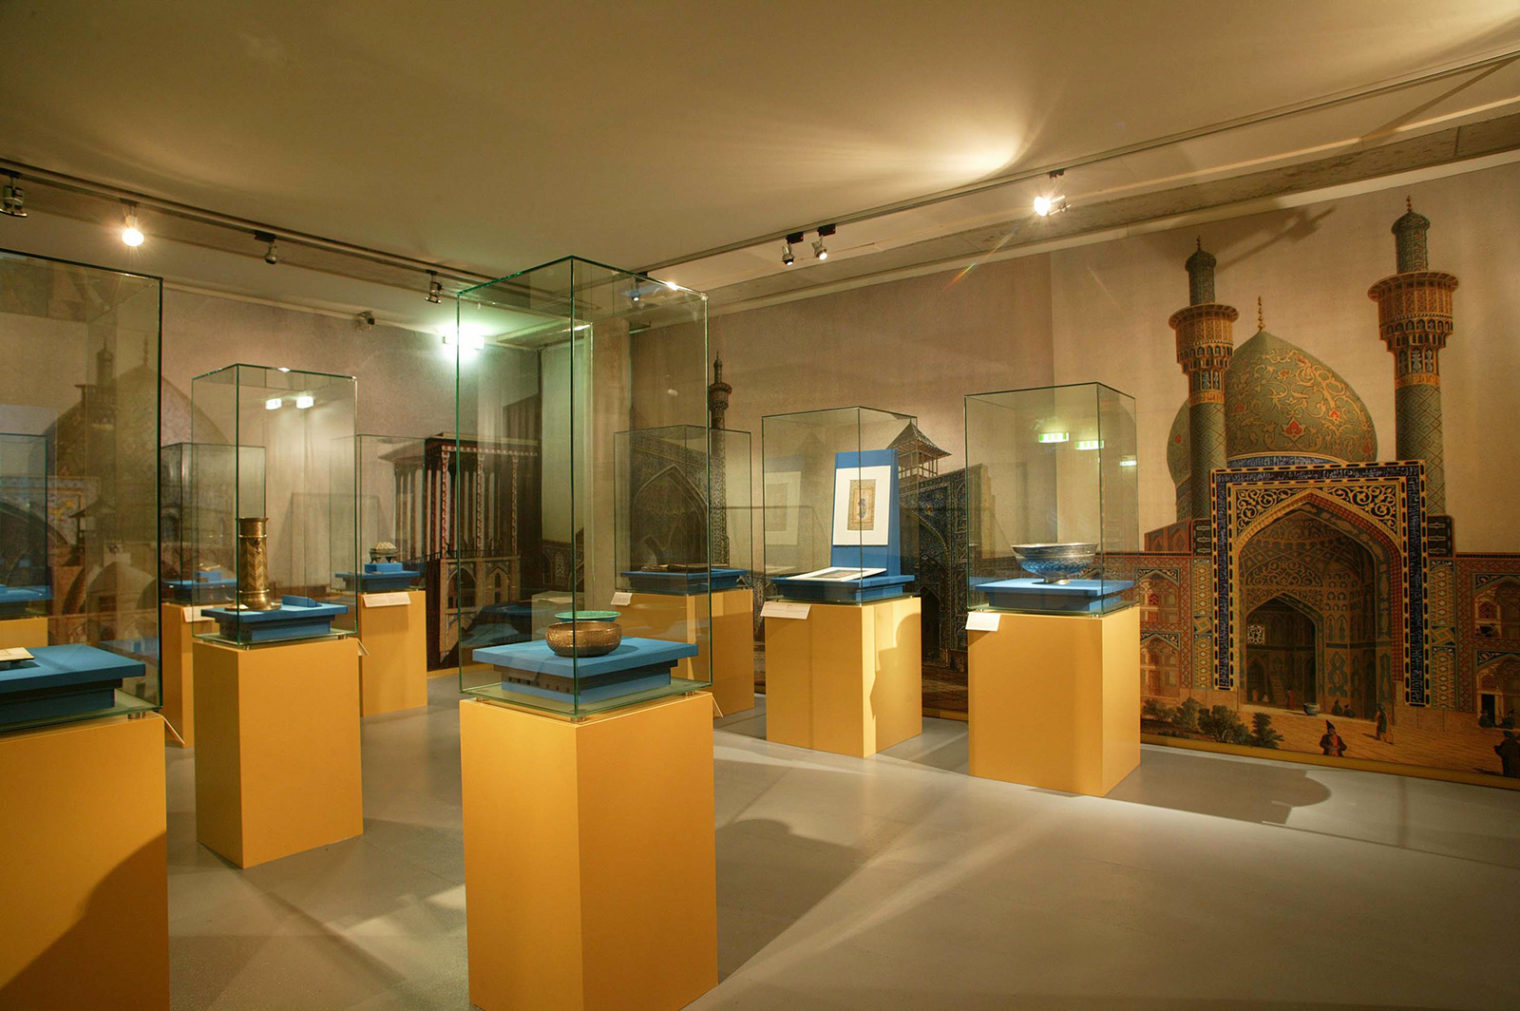 Exhibits at the Orient exhibition